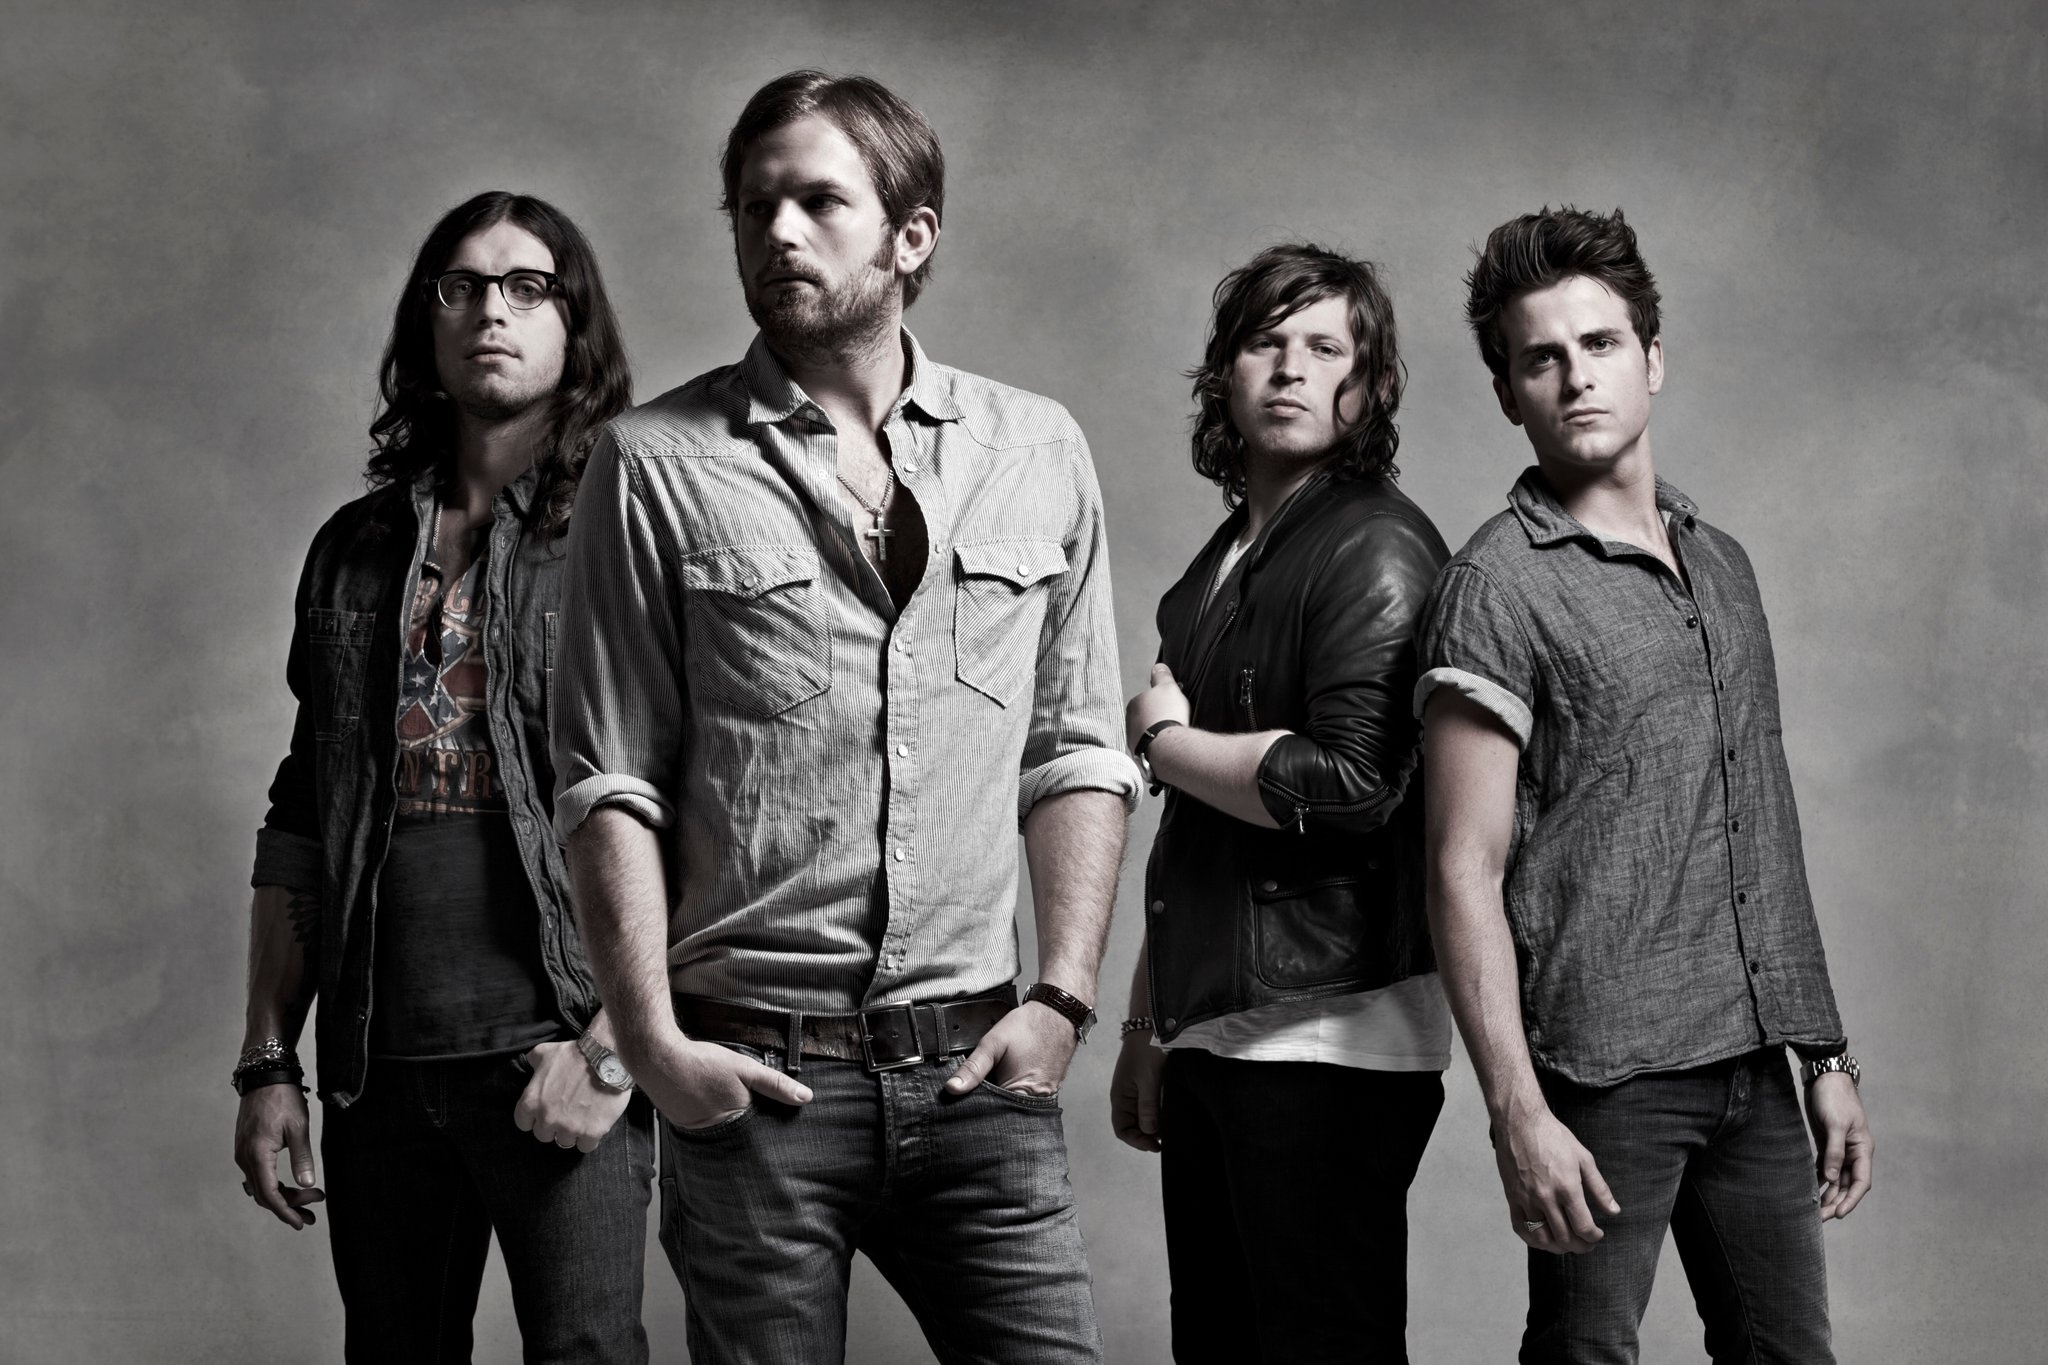 Kings of Leon, Music band, High-quality pictures, 4K wallpapers, 2050x1370 HD Desktop